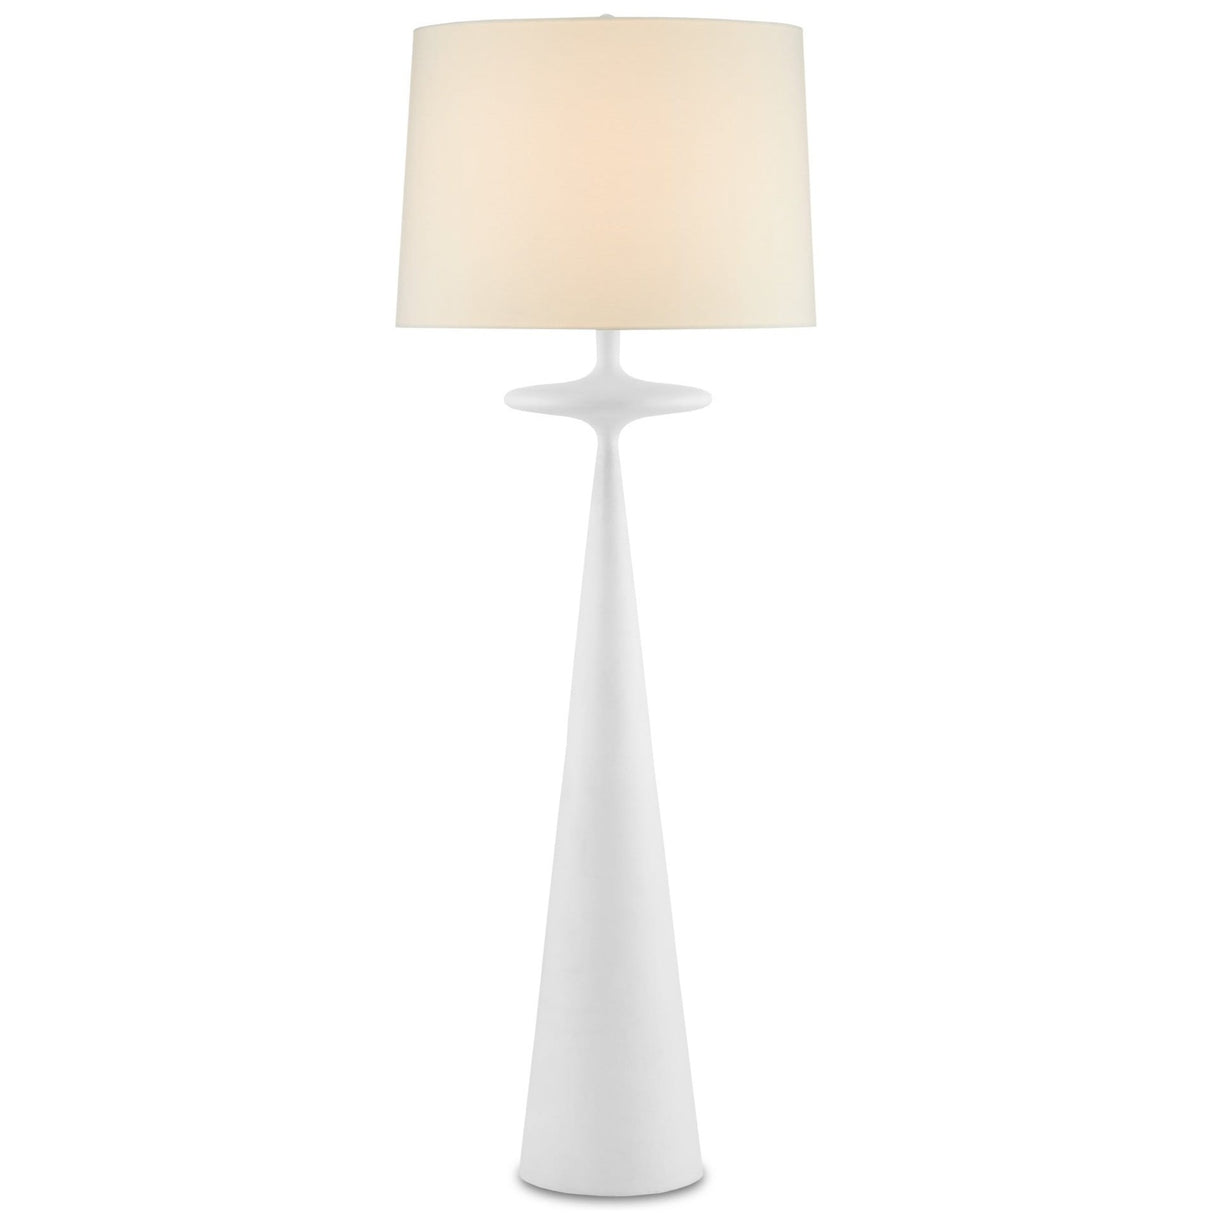 Currey and Company Giacomo Floor Lamp Lamps currey-co-8000-0104